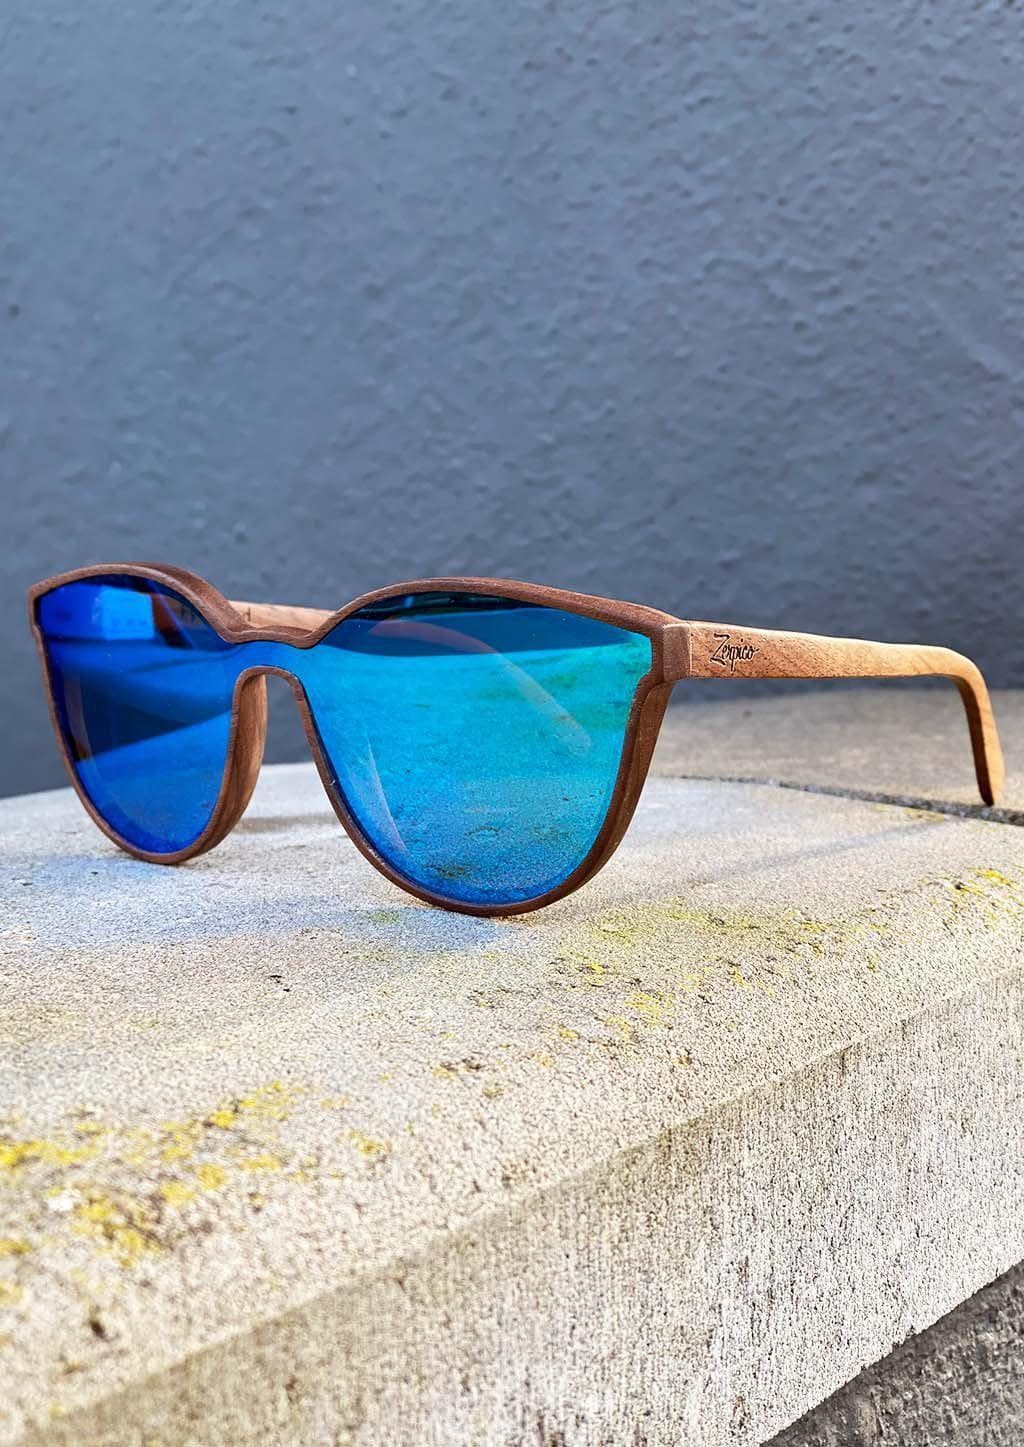 Eyewood - Savannah - All wooden sunglasses with full front blue mirror lenses.